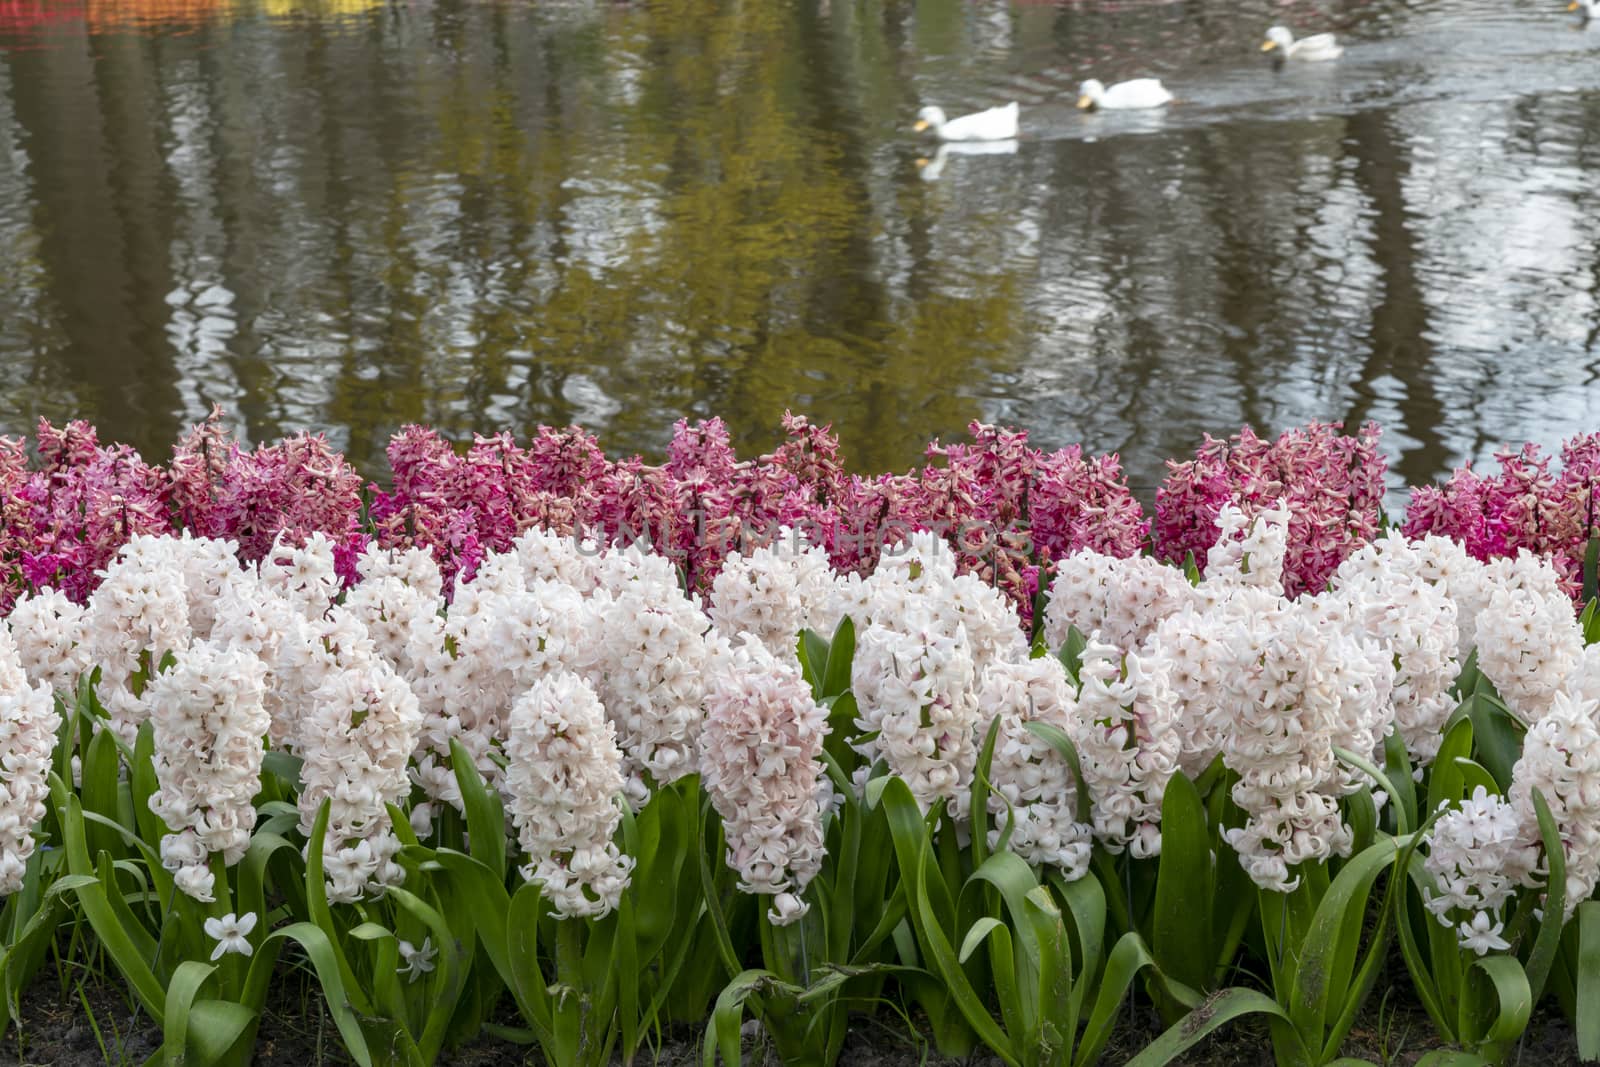 White and pink hyacinth flower at the ed of the canal with white blurry duck passing by